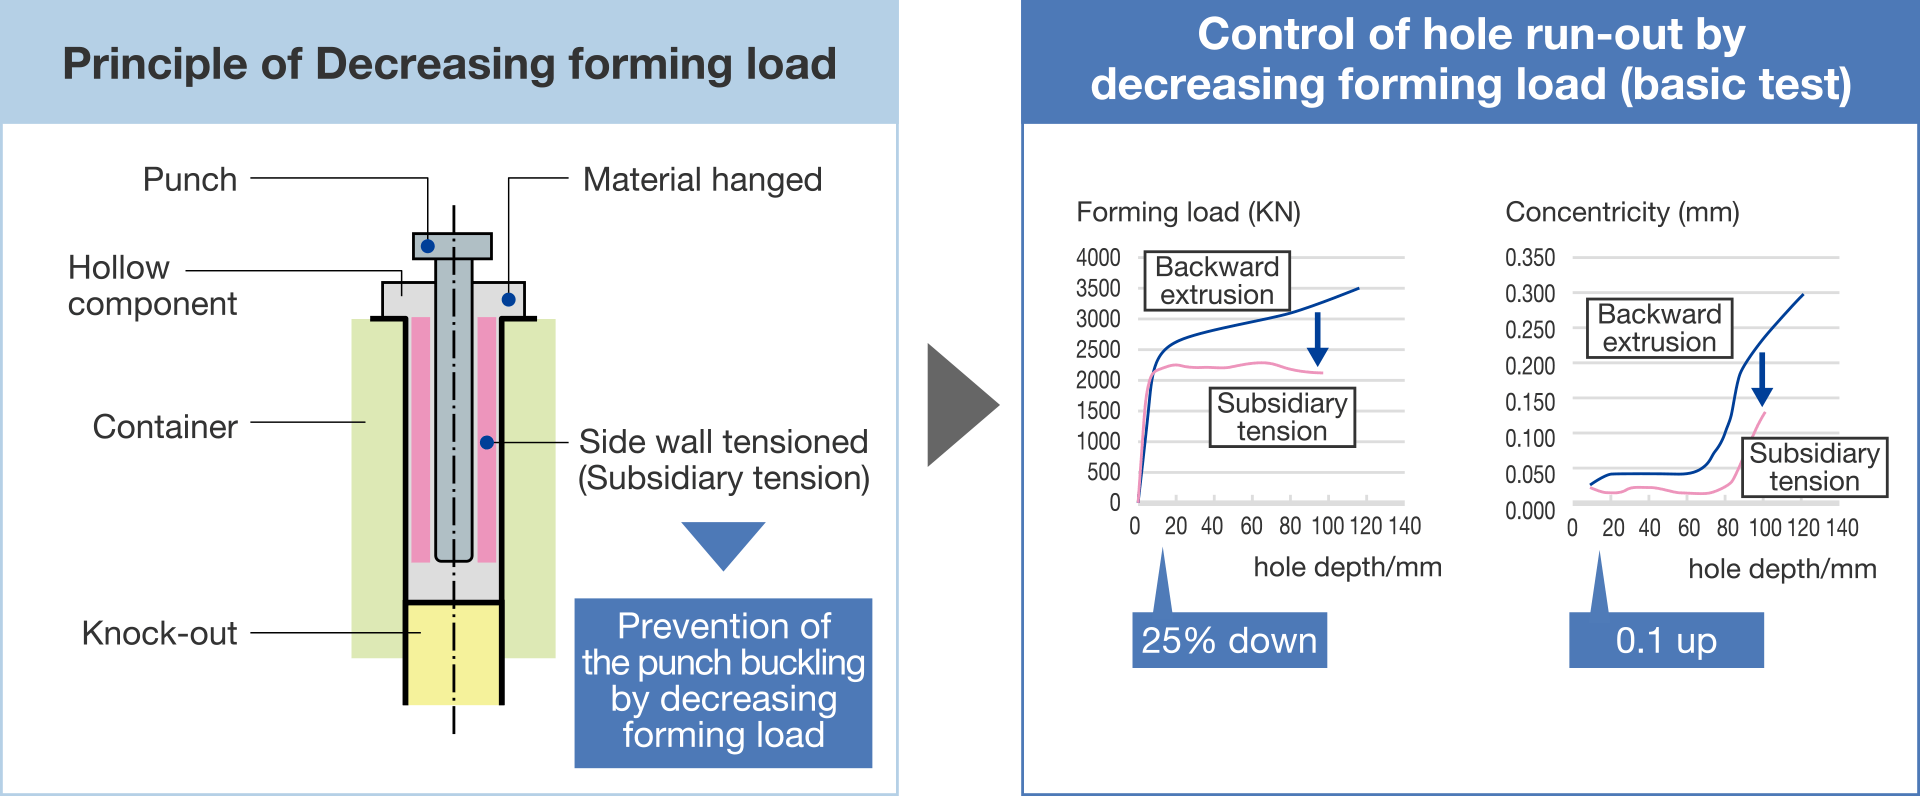 Decrease of forming load with subsidiary tension.